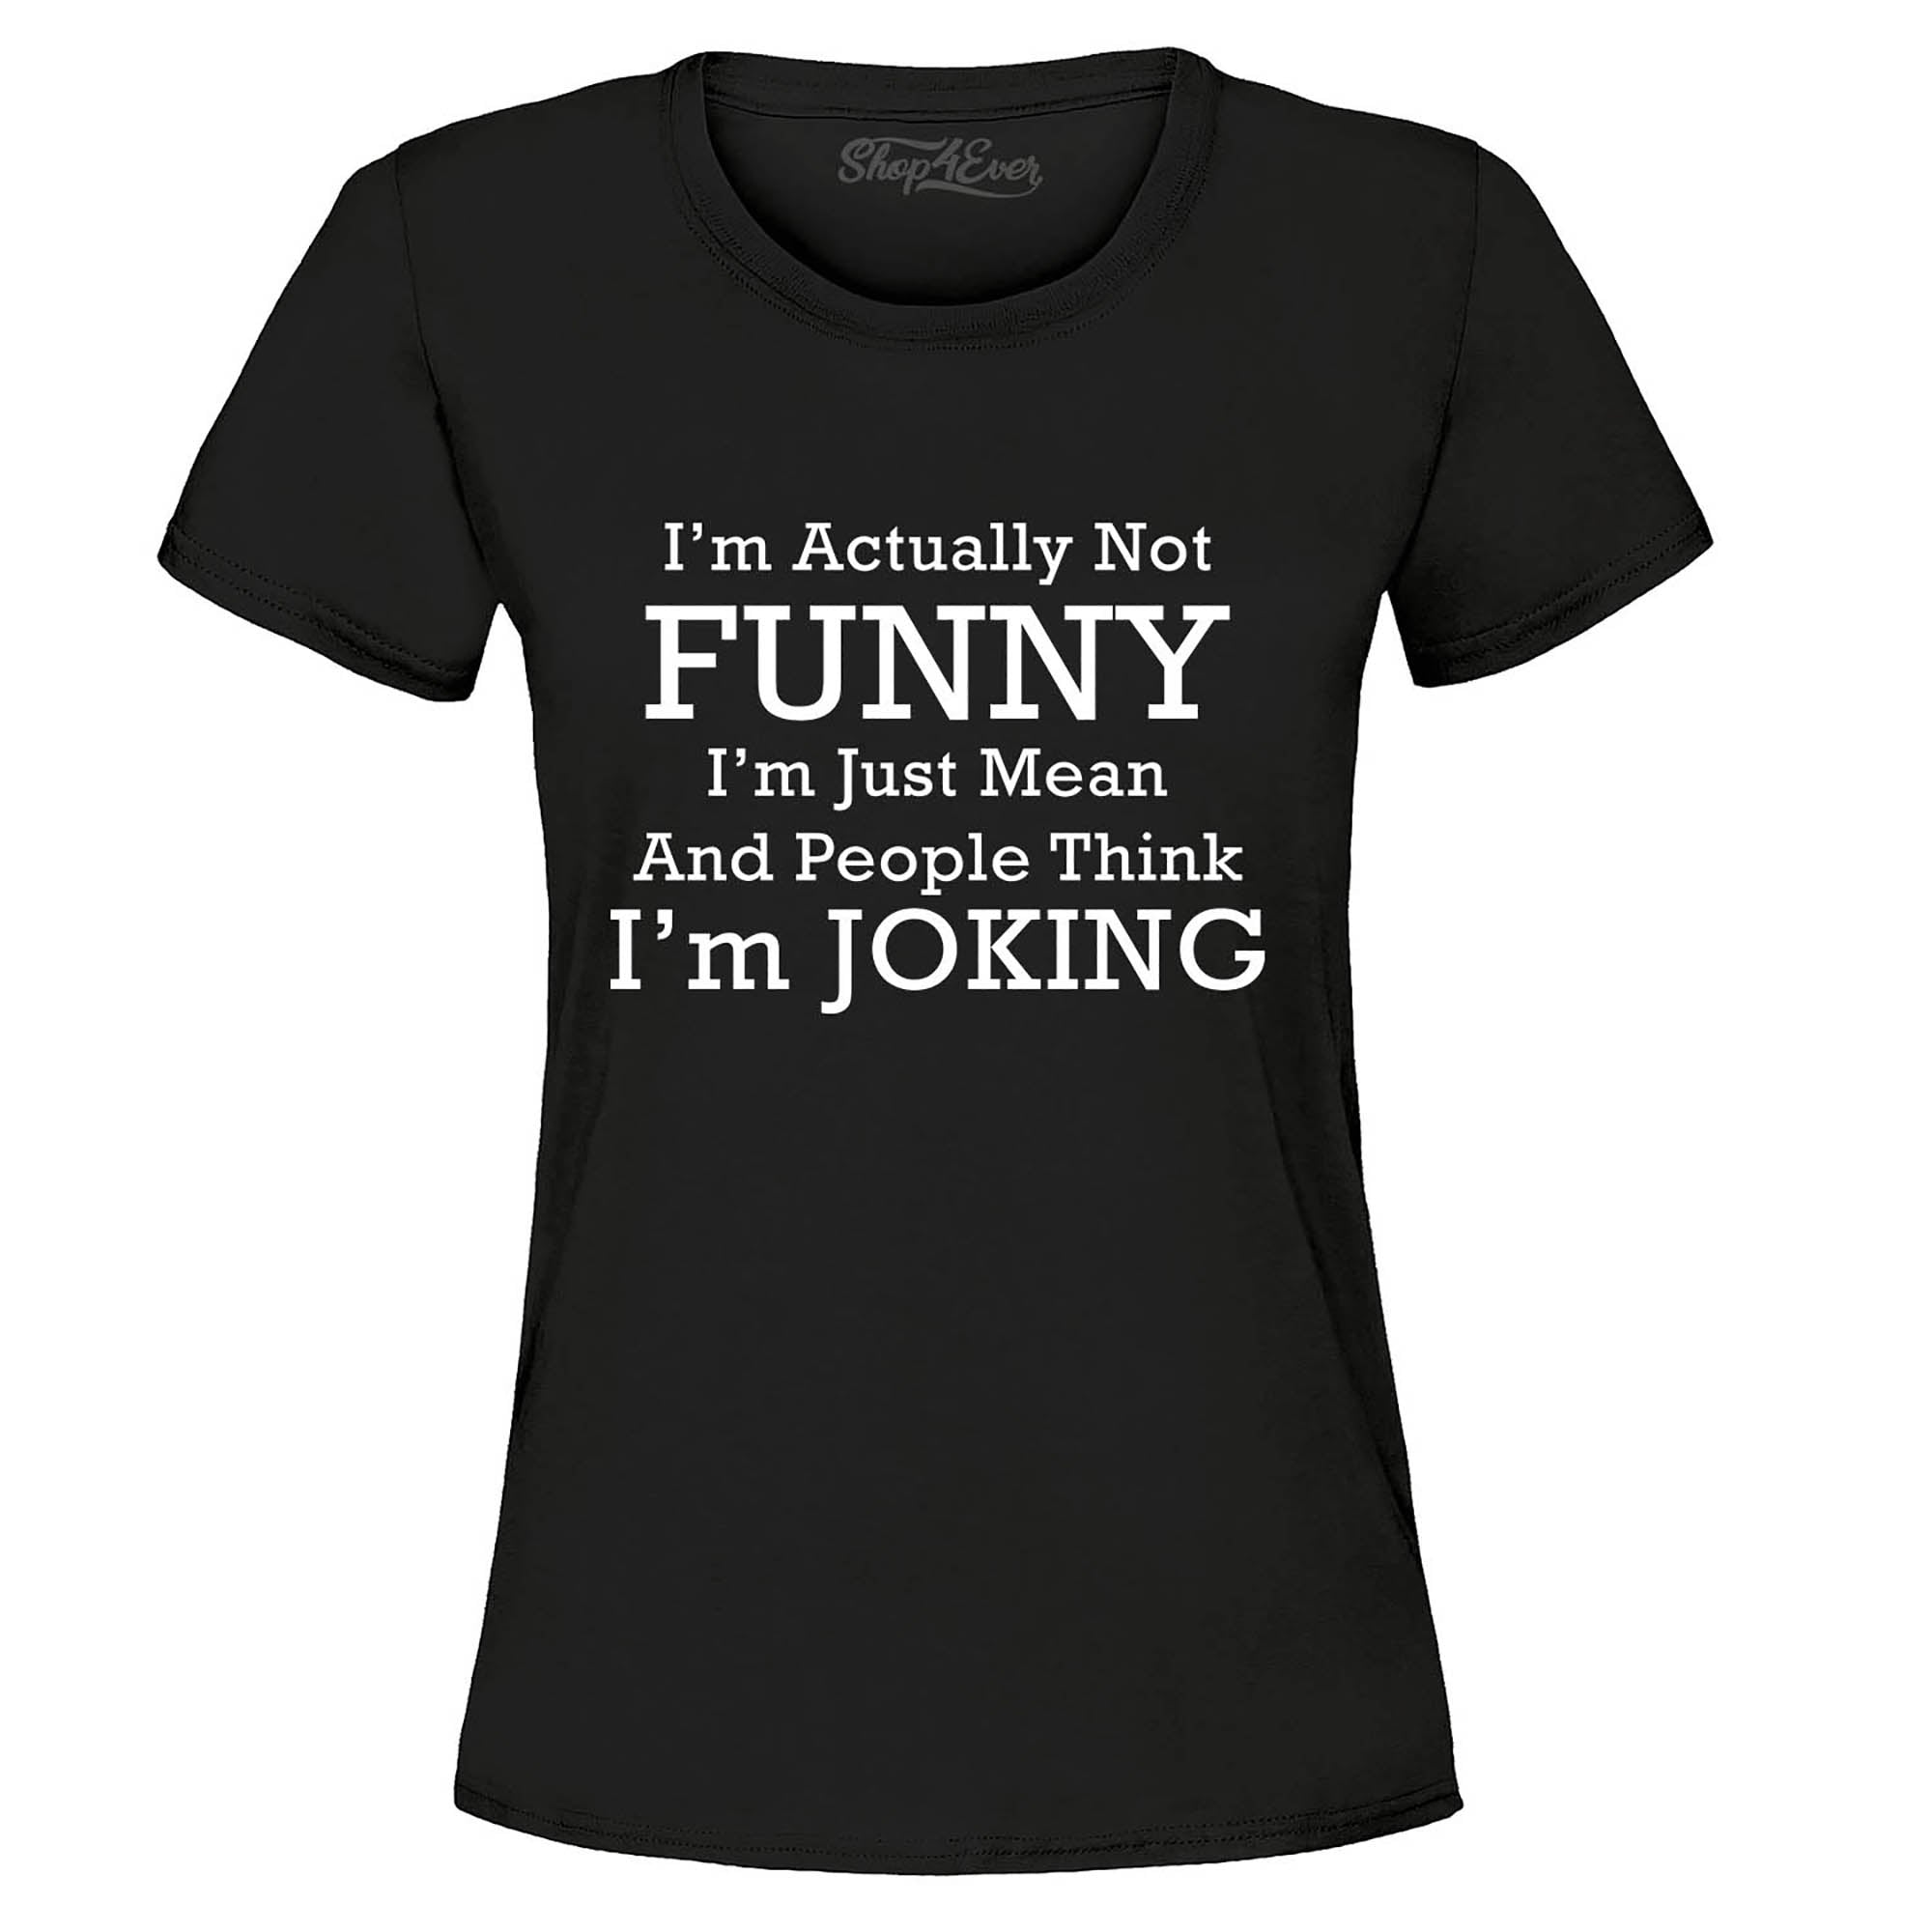 I'm Actually Not Funny I'm Just Mean Women's T-Shirt